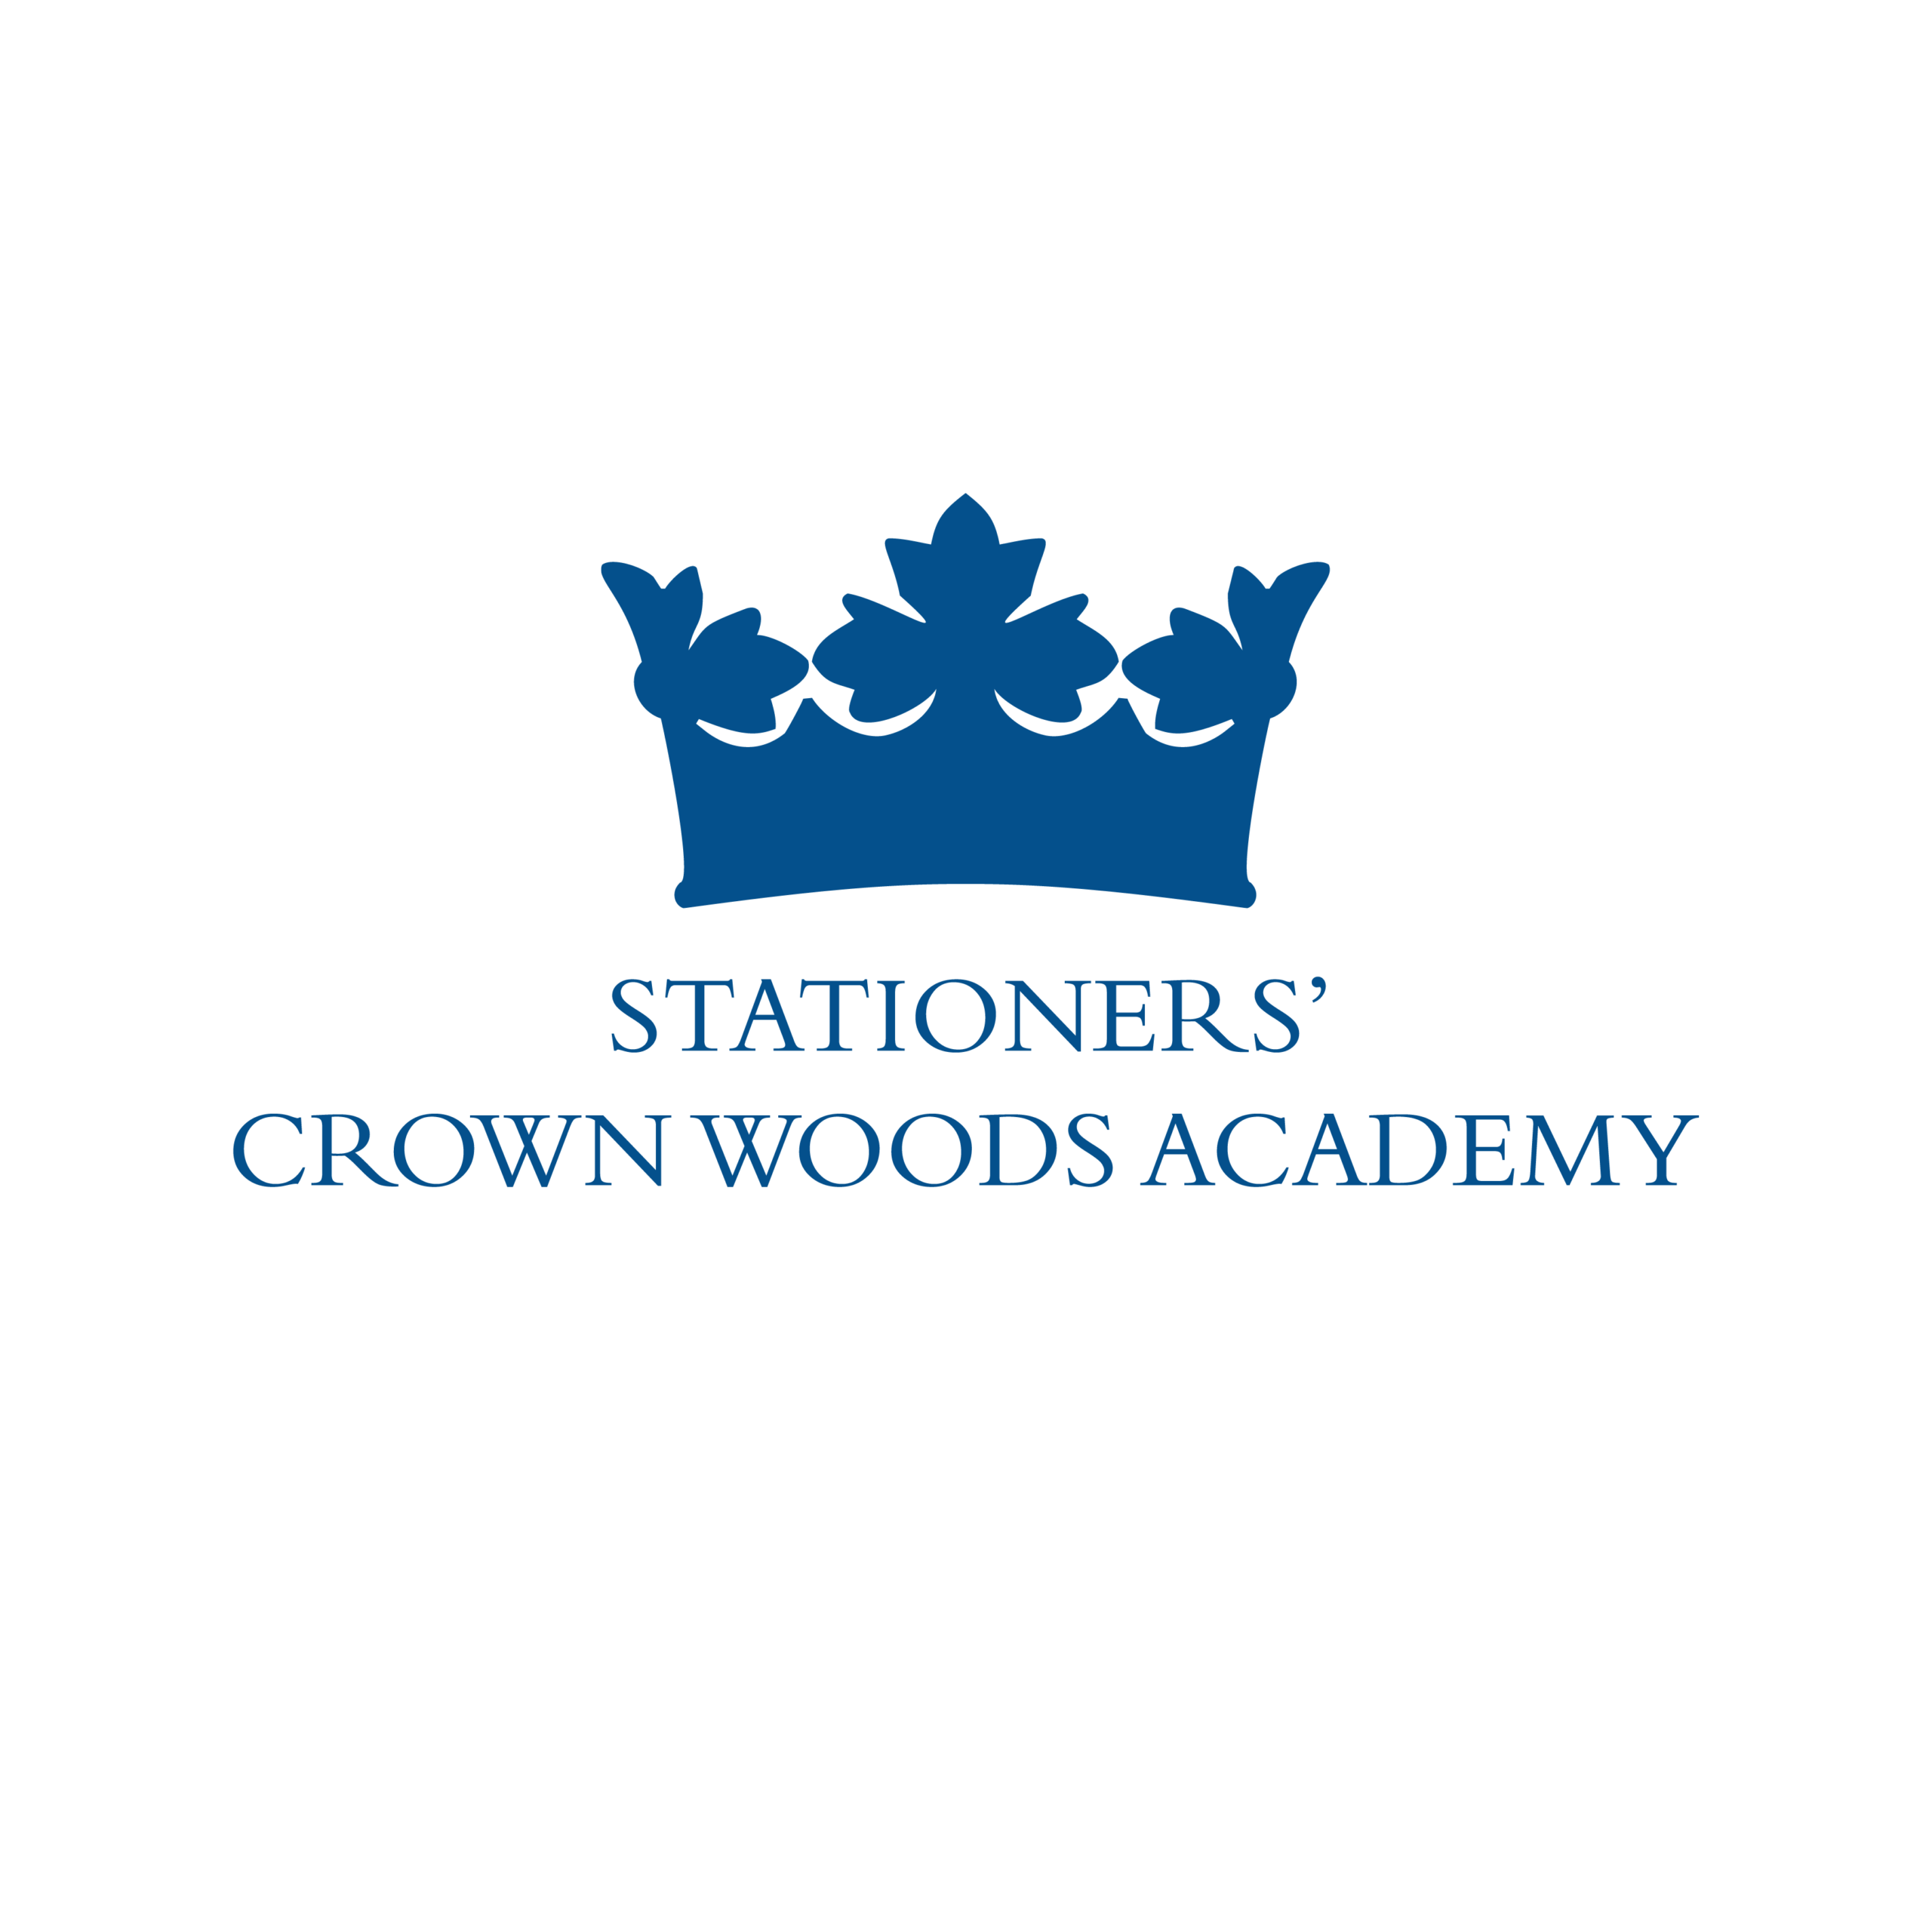 Stationers' Crown Woods Academy Logo